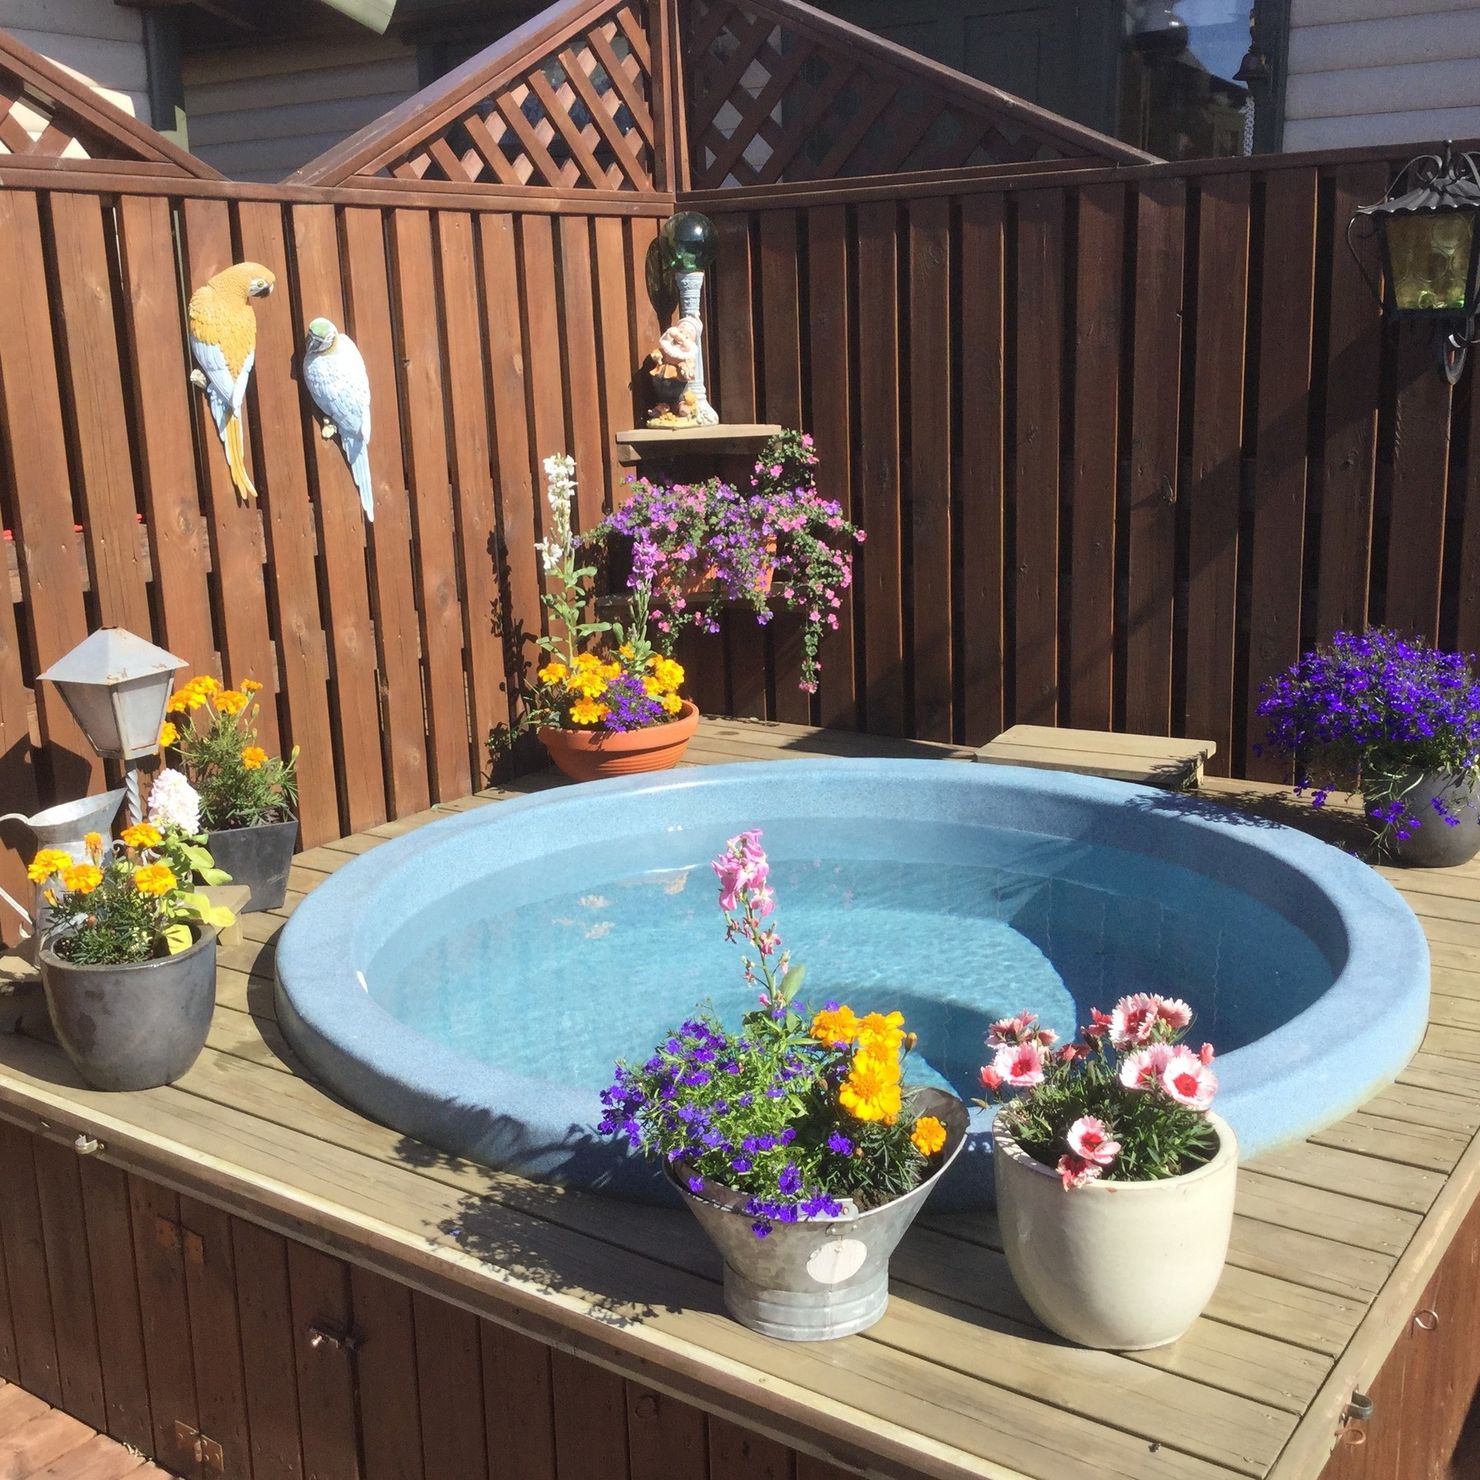 Perfect for relaxing after an exciting day on holiday: private hot tub on the terrace